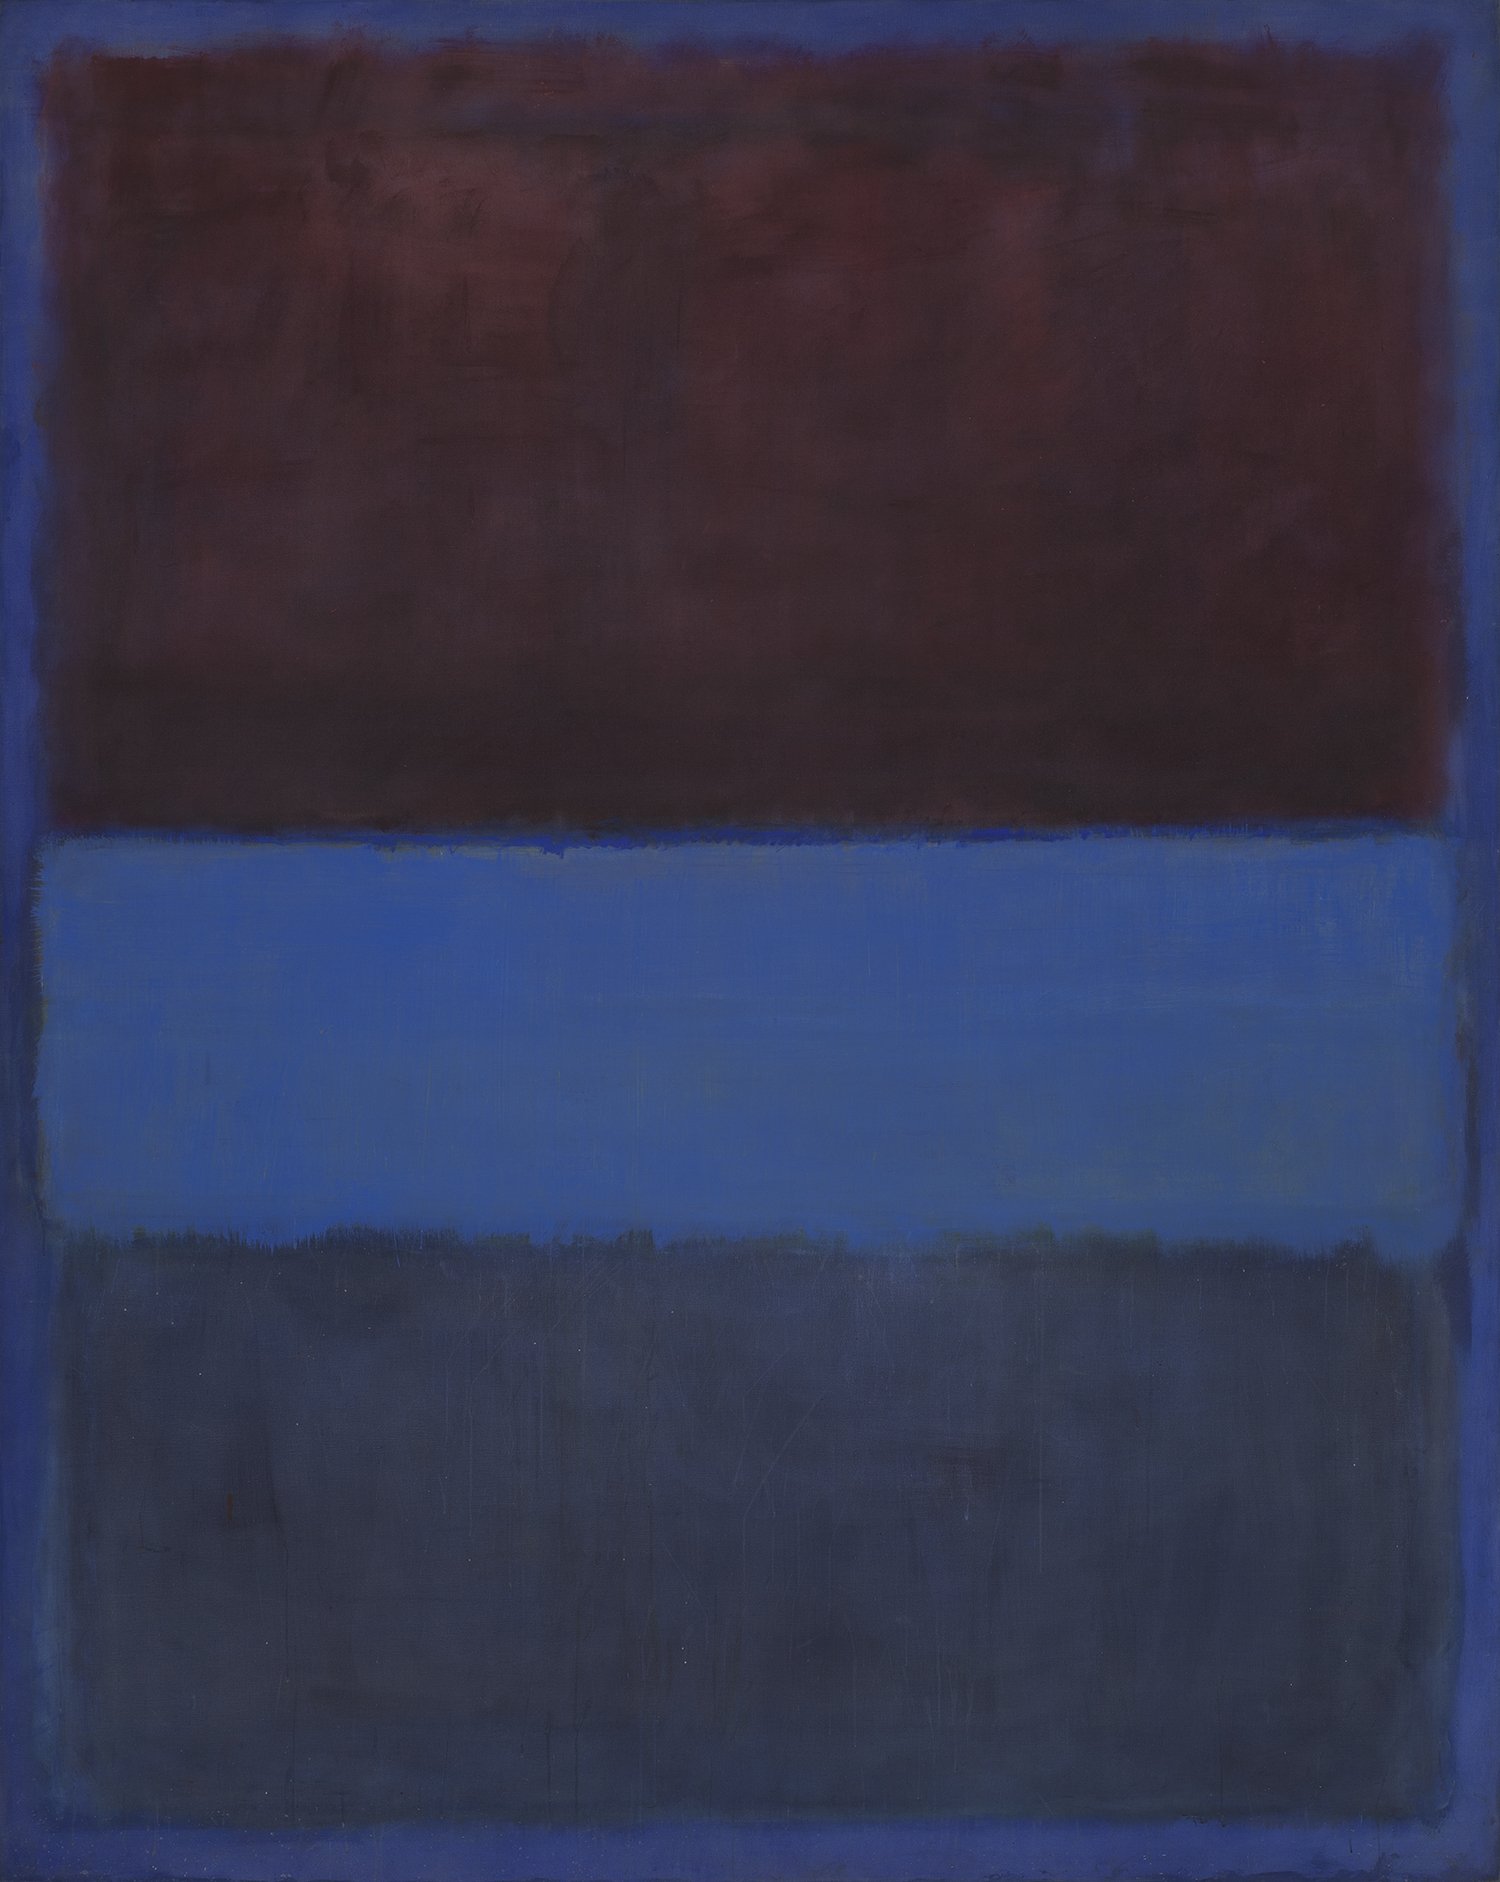 A three-part color field painting titled No. 61 (Rust and Blue) by Mark Rothko. The top section is filled with a deep, warm rust color, followed by a smaller block of light blue in the center. The bottom portion of the painting is a cool purple-blue, creating a balanced contrast with the other colors.